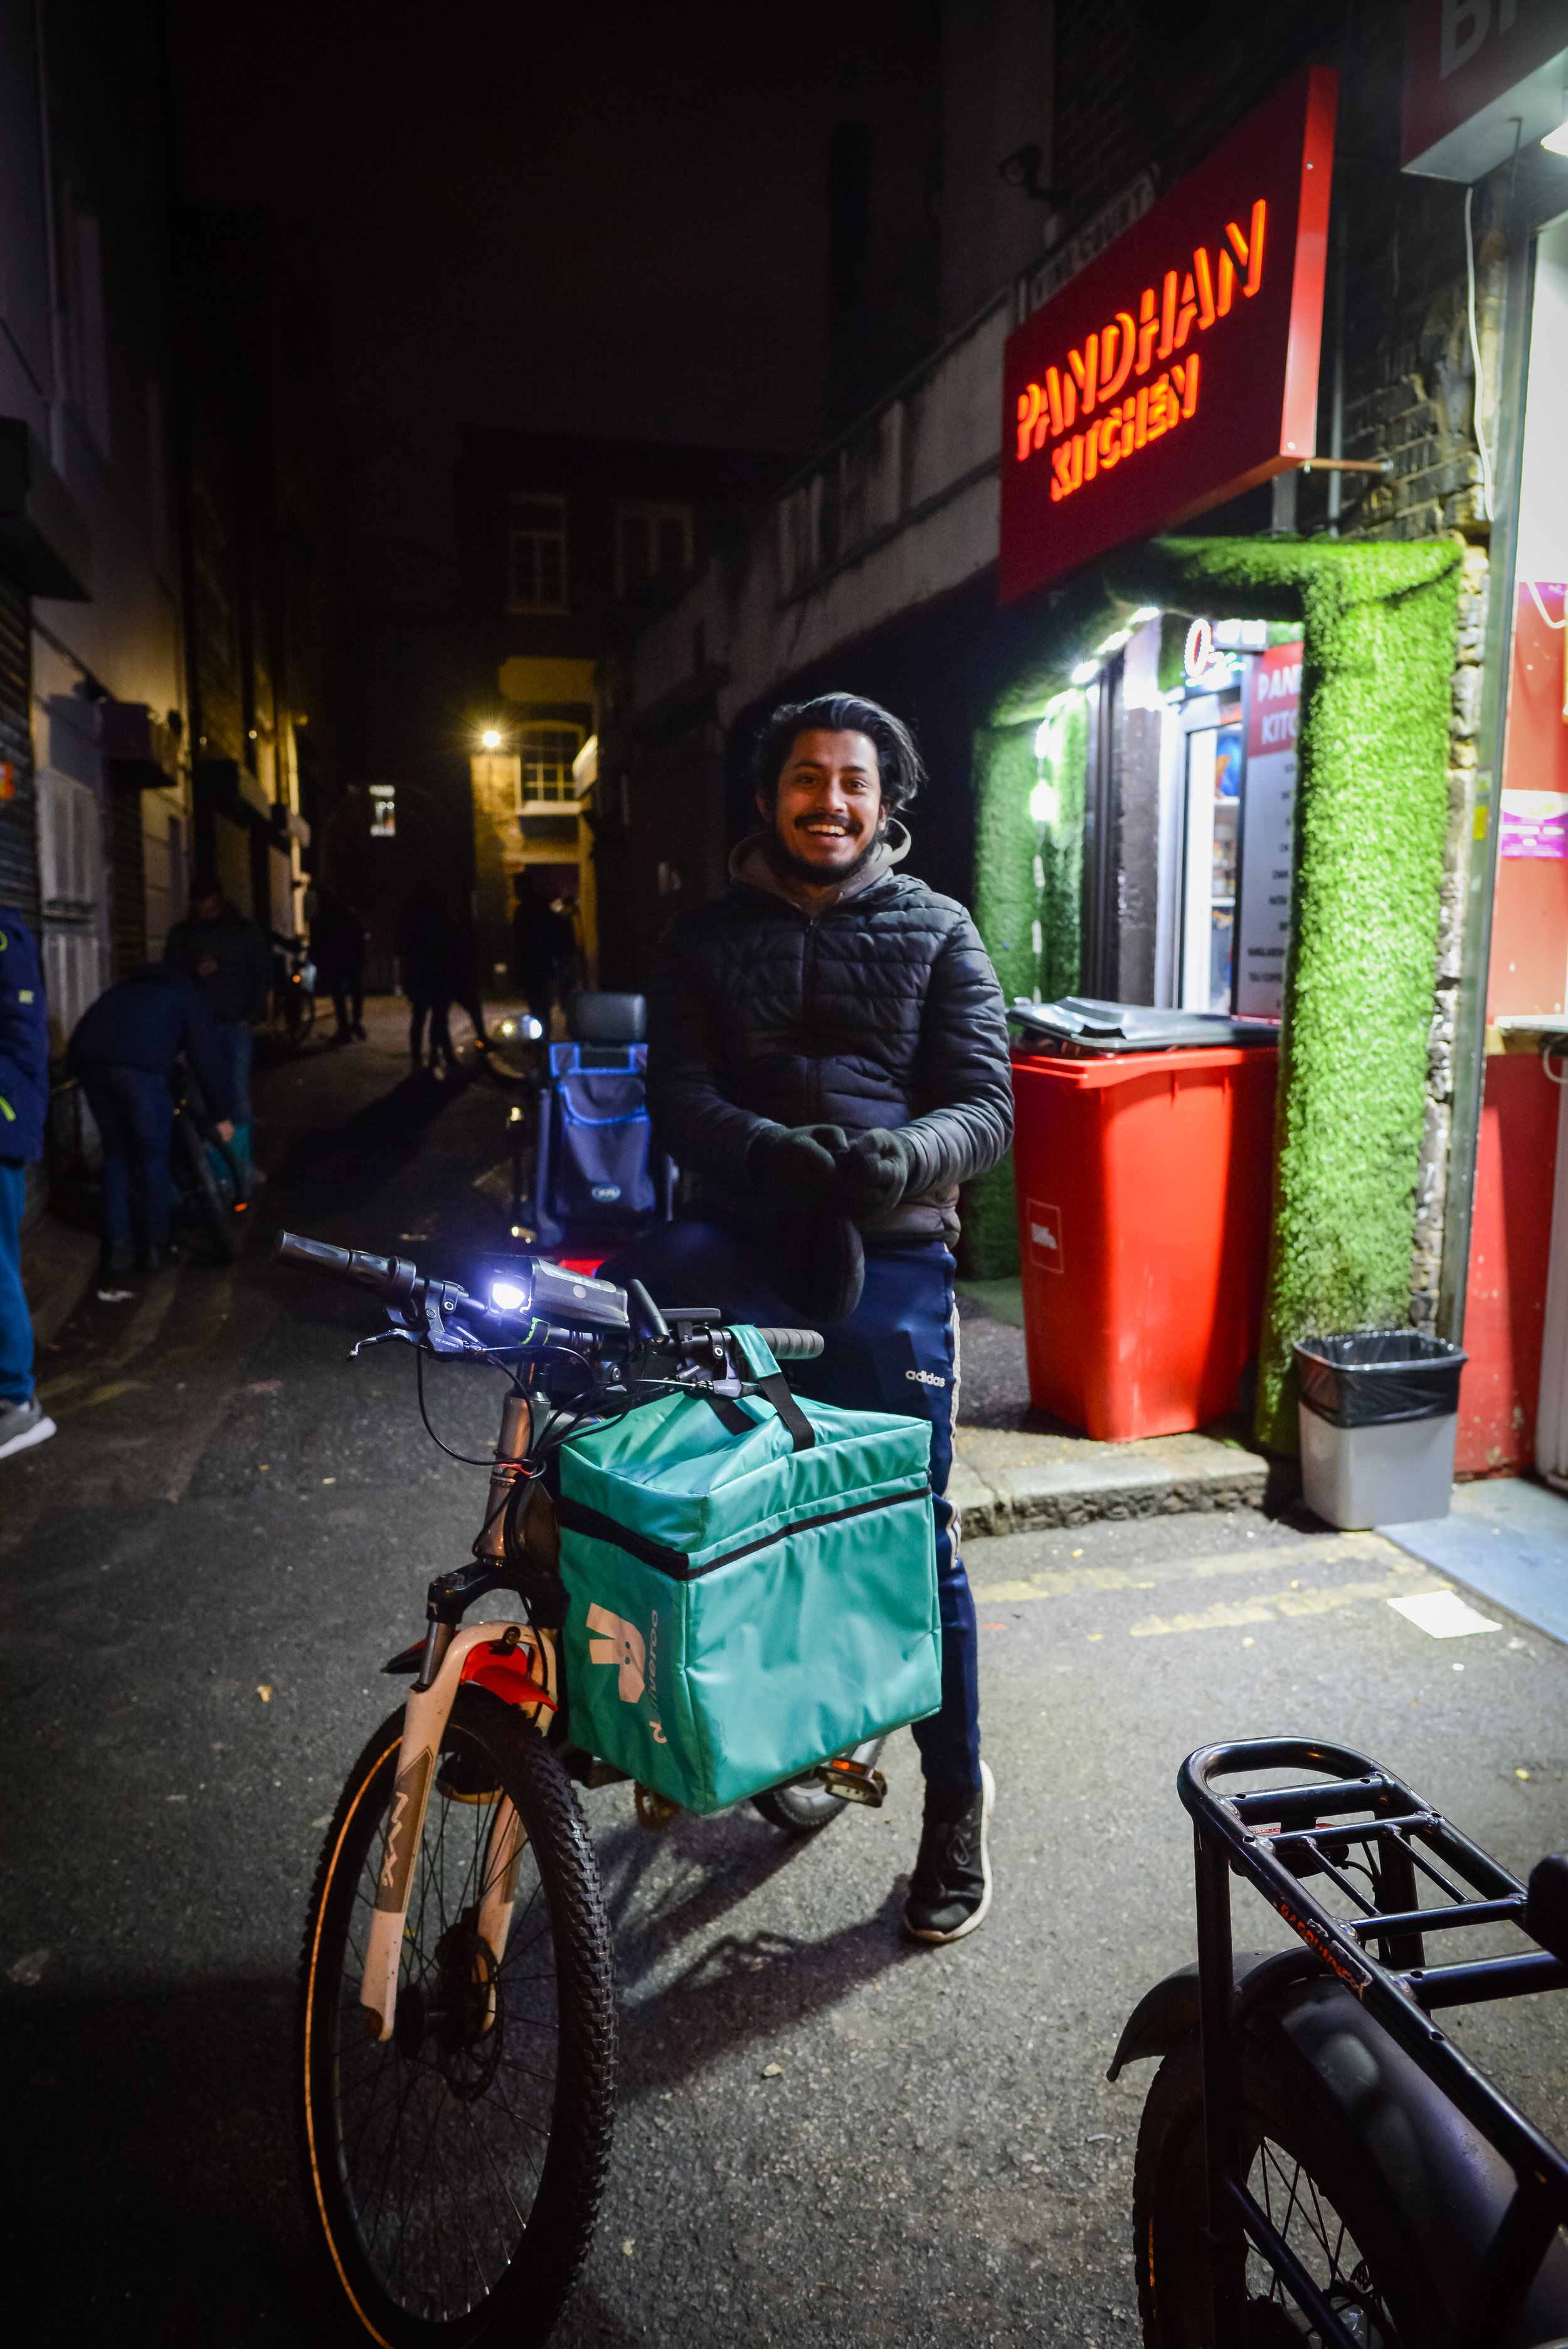  Nurul, 25 from Bangladesh - He built his own electric bike with help from his friend Faruk. He wants to study and get into business.  “sometimes work is very busy and other times not - lots of riders around - it’s not consistent,” 